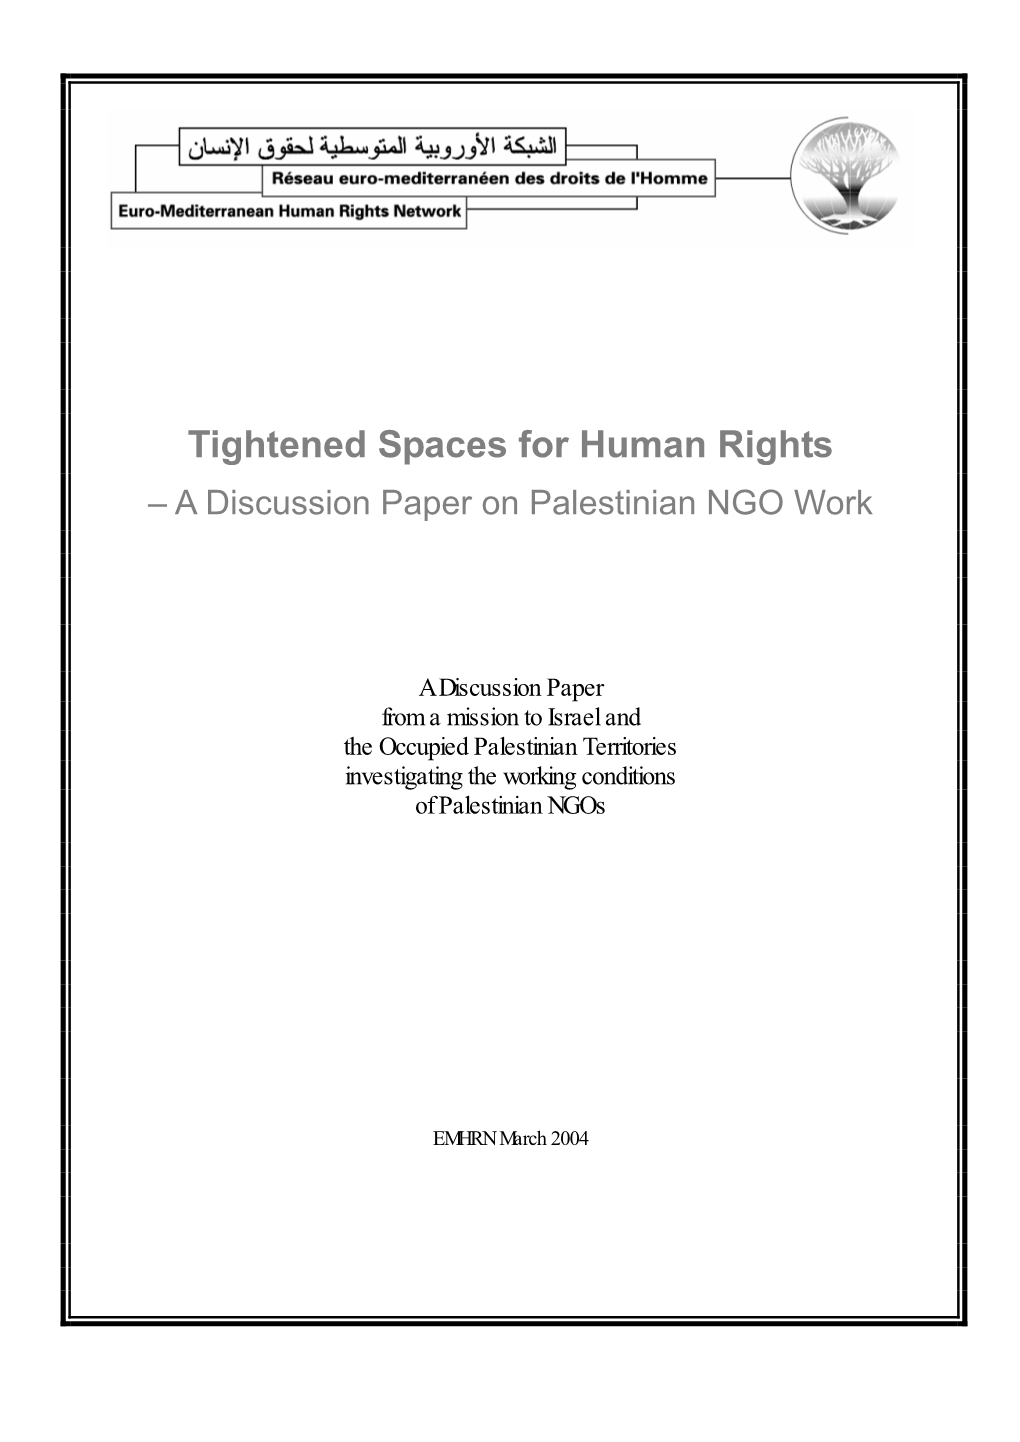 Tightened Spaces for Human Rights – a Discussion Paper on Palestinian NGO Work